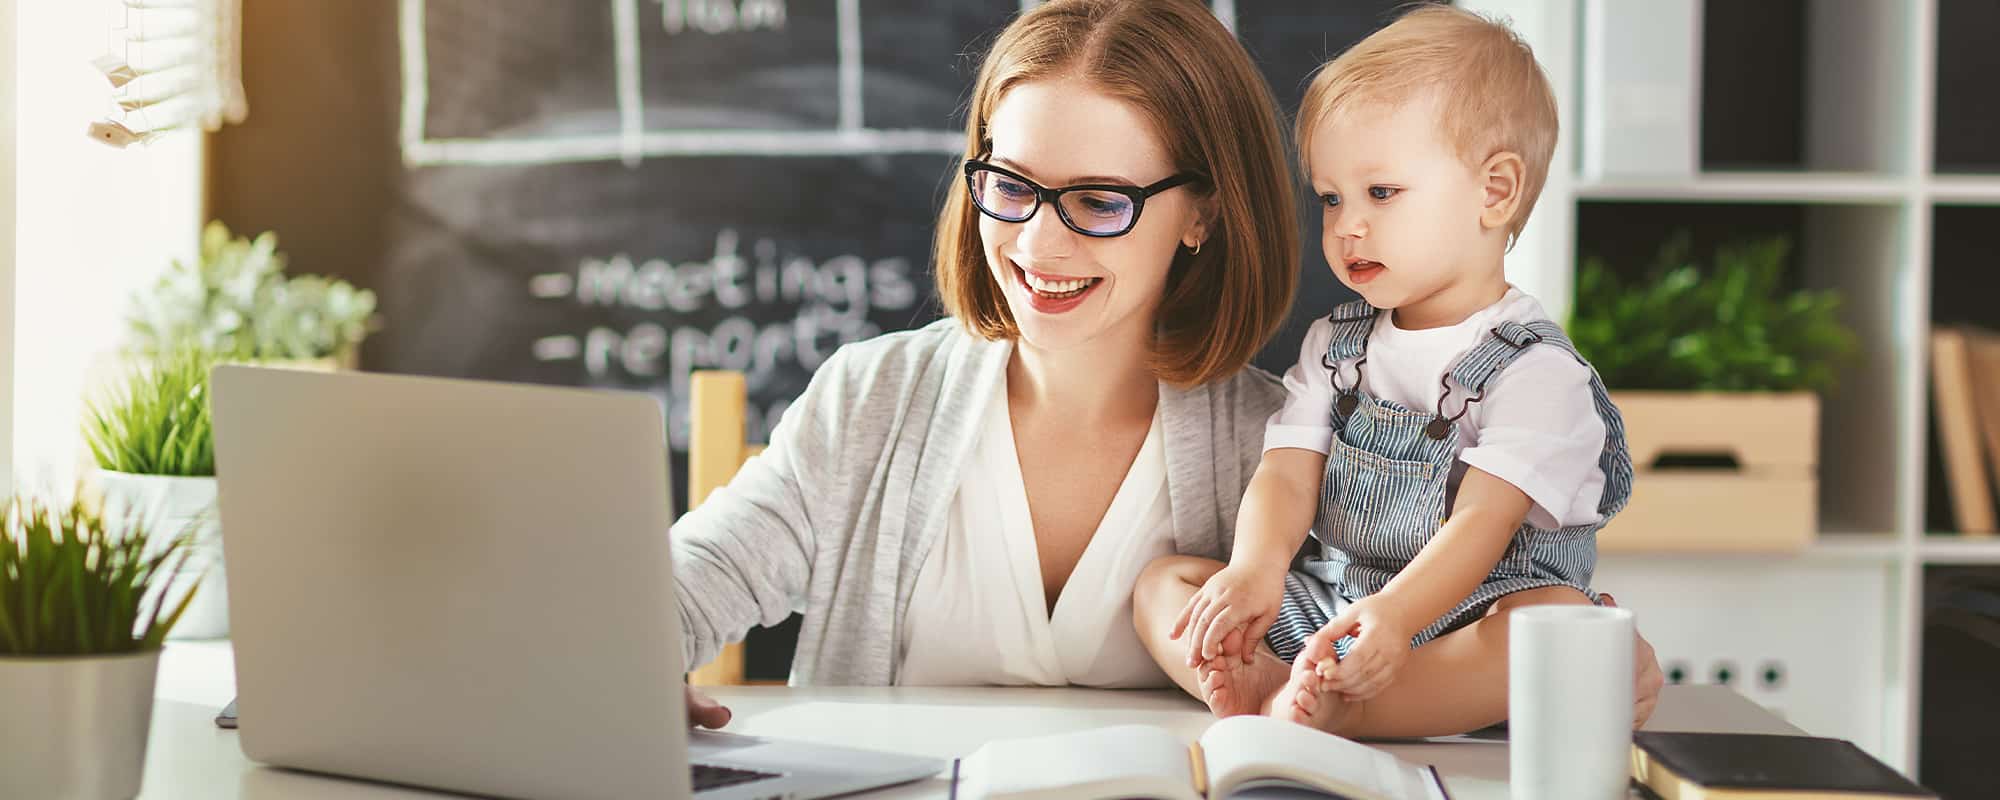 5 Flexible Jobs For Parents, And How to Land One